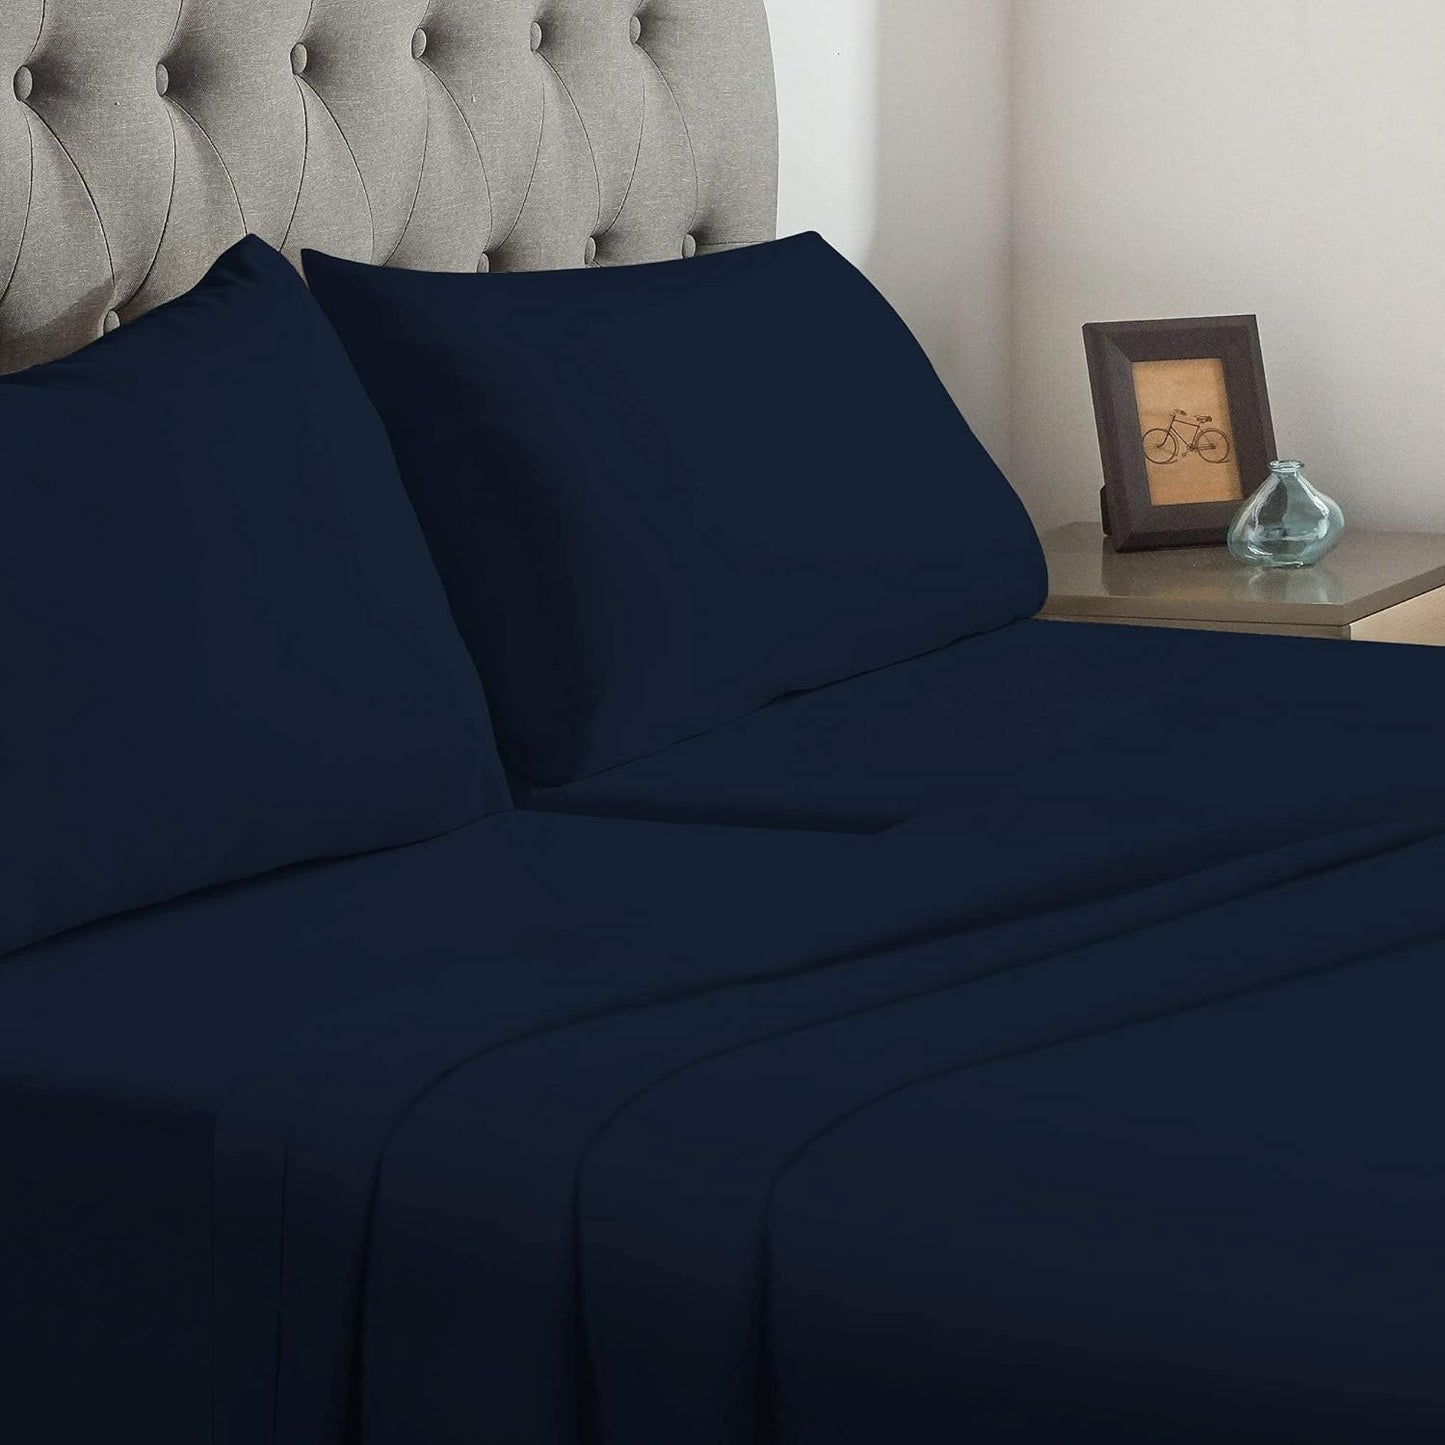 Split California King Sheet Set for Adjustable Beds - Navy Blue Solid, 800 Thread Count 100% Egyptian Cotton, Sateen Weave Comfortable - 5 Piece Set, 15" Deep Pocket with All Around Elastic